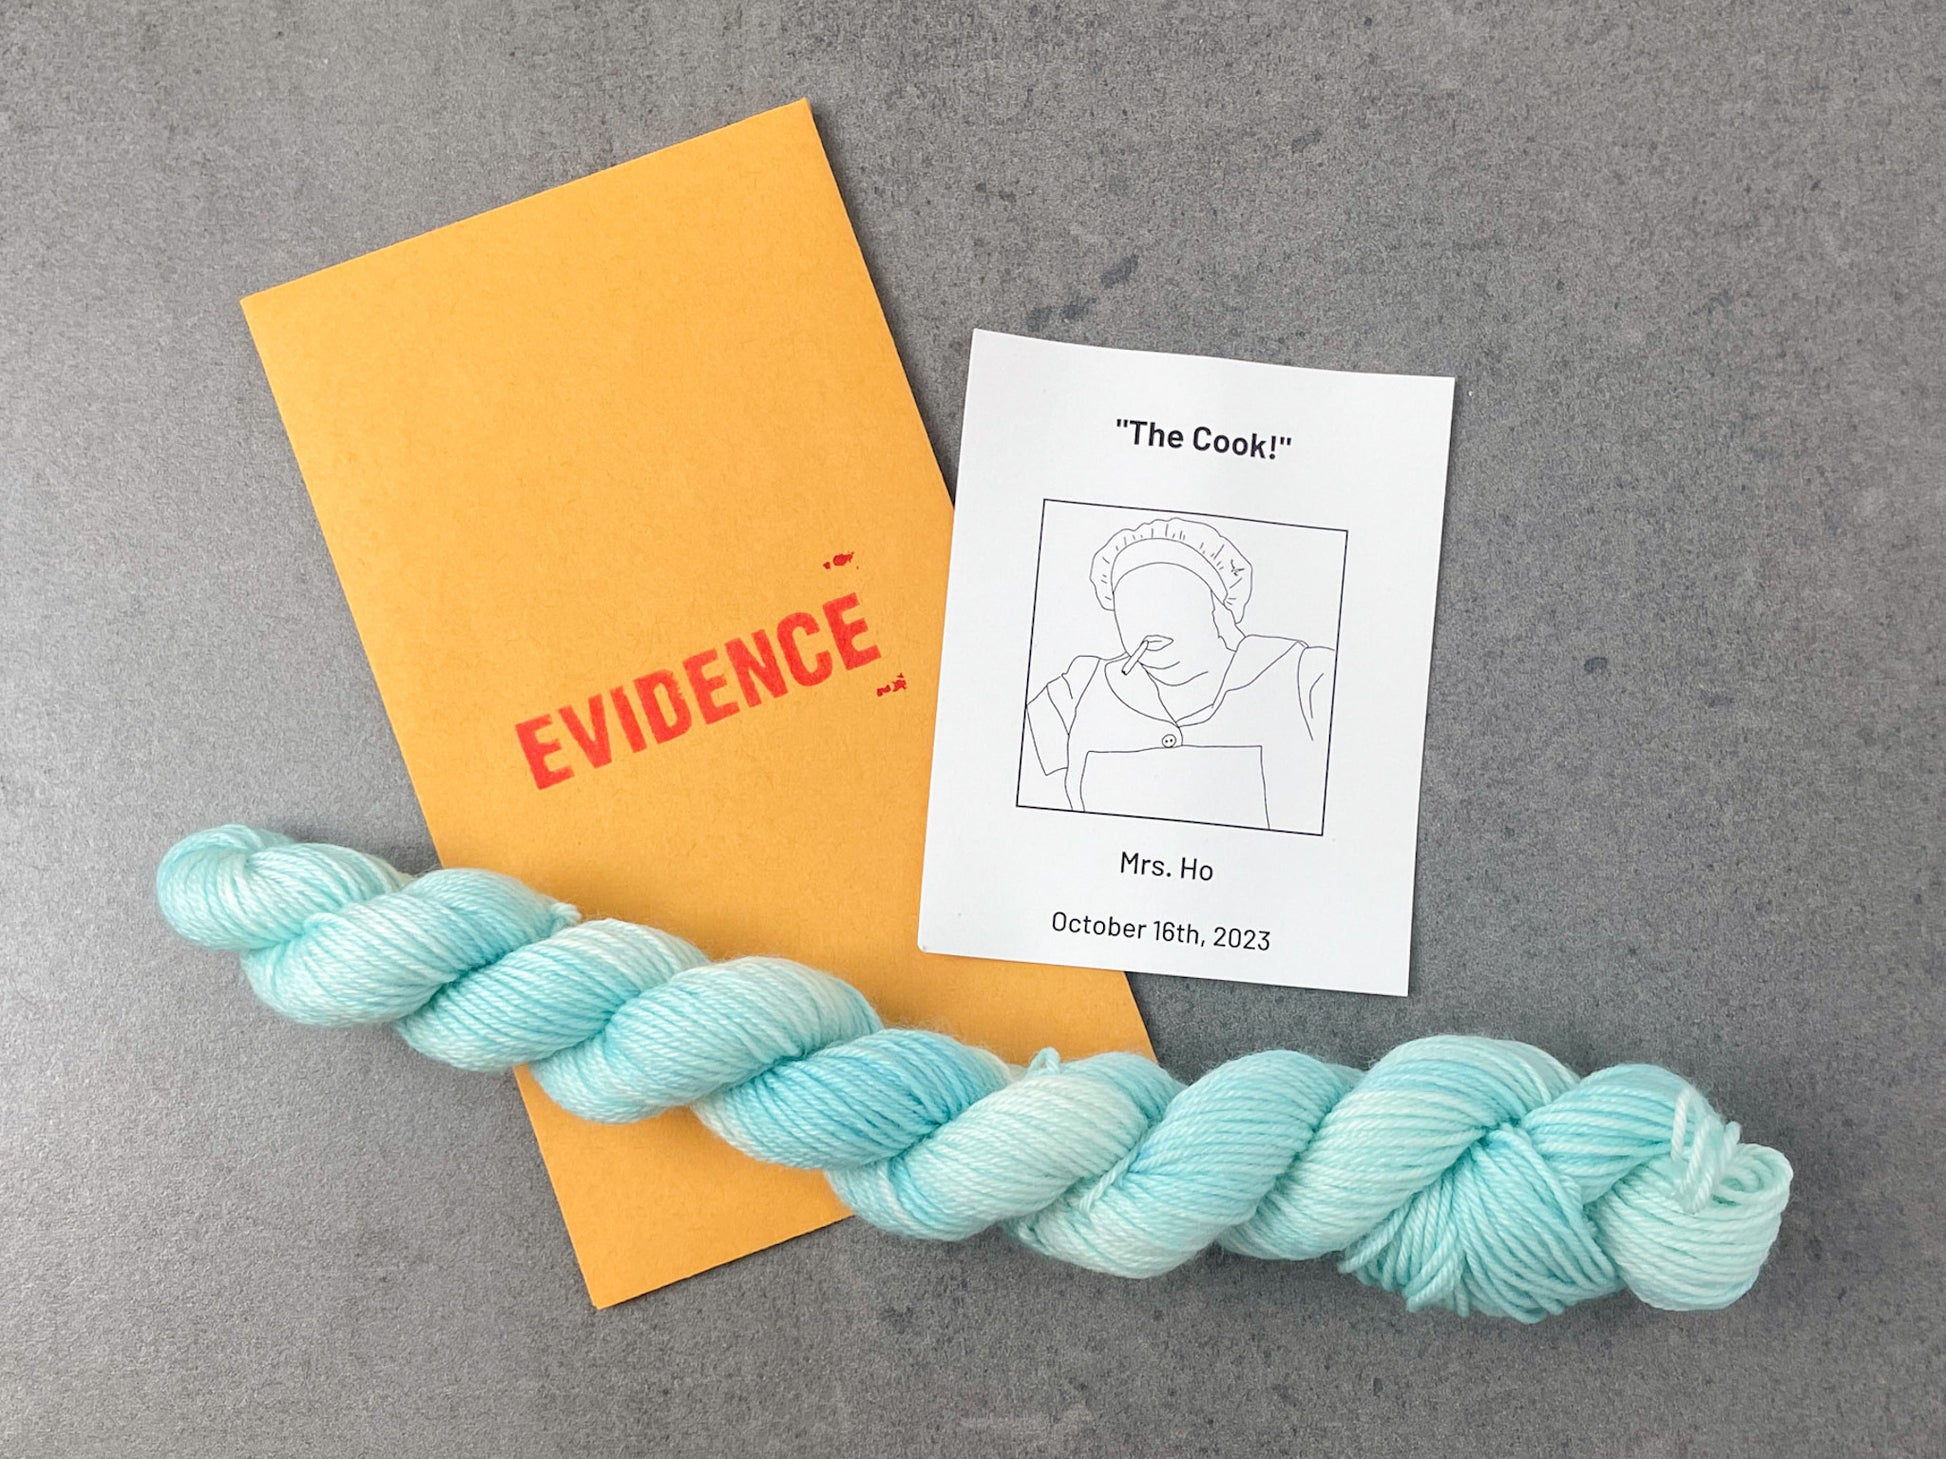 A skein of aqua tonal yarn on top of an envelope stamped with "Evidence" and a card with a drawing of Mrs. Ho on it.